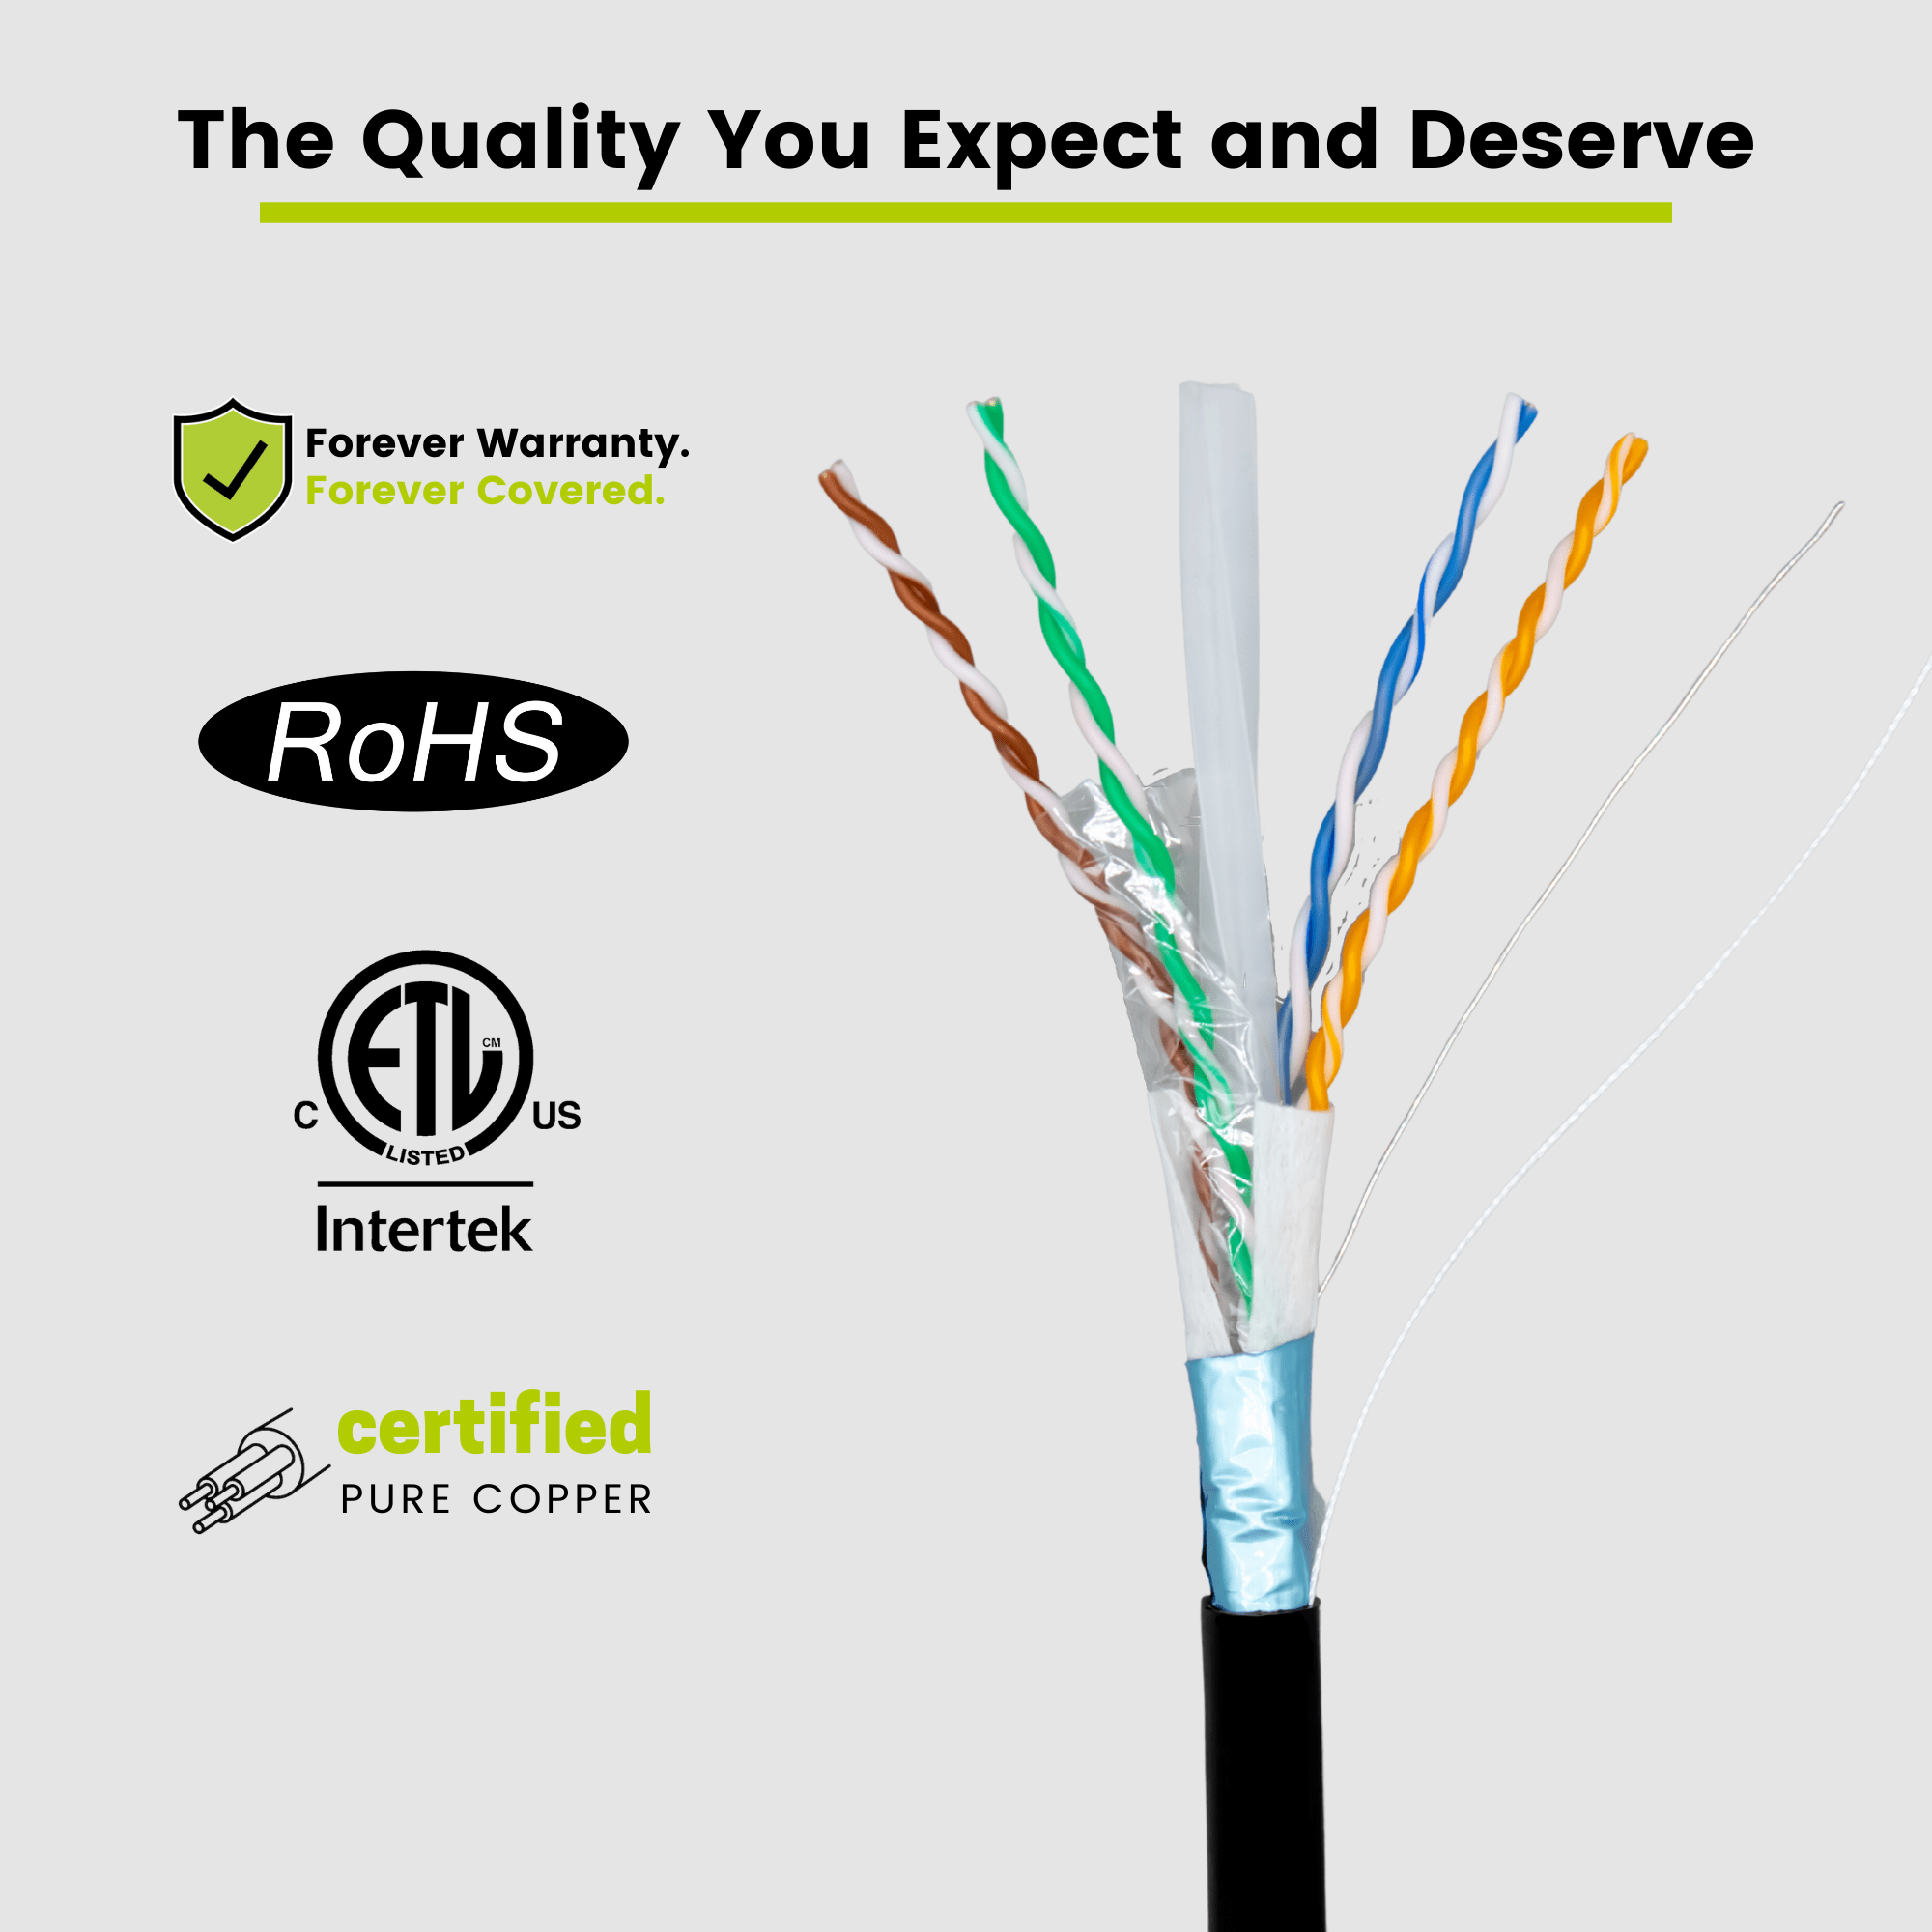 CAT6A FTP Outdoor Bulk Ethernet Cable with Double Jacket - Patch Cords  Online